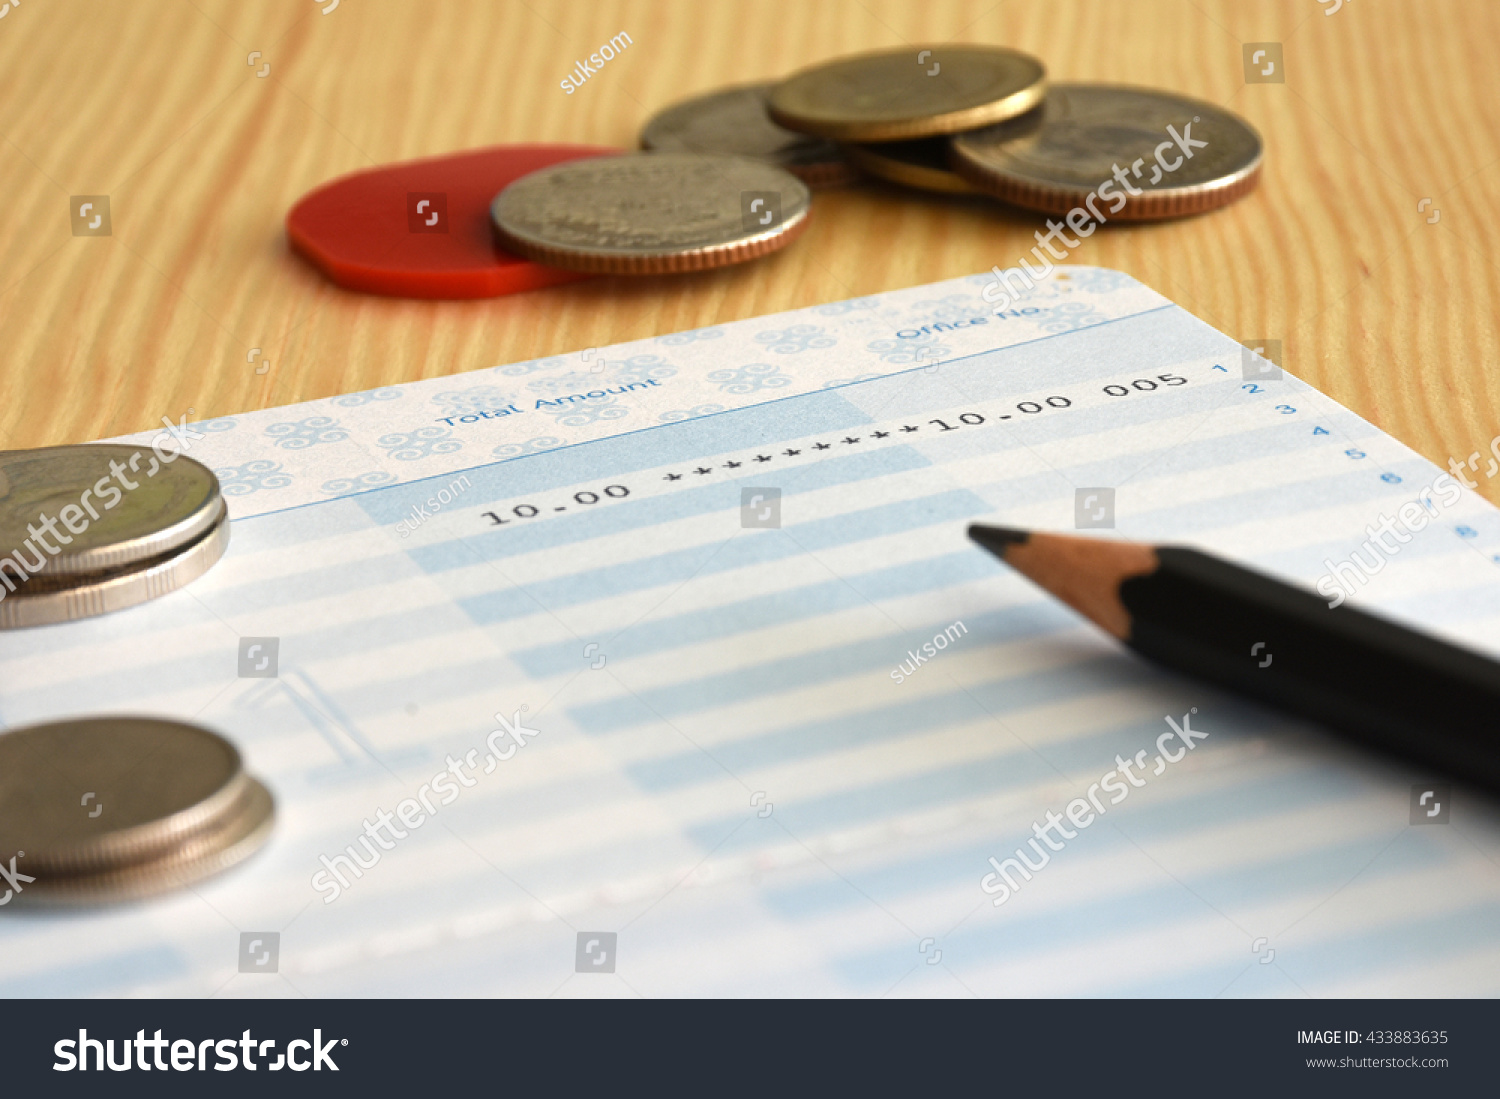 Saving account from bank with coins and pencil on the table for financial and loan #433883635